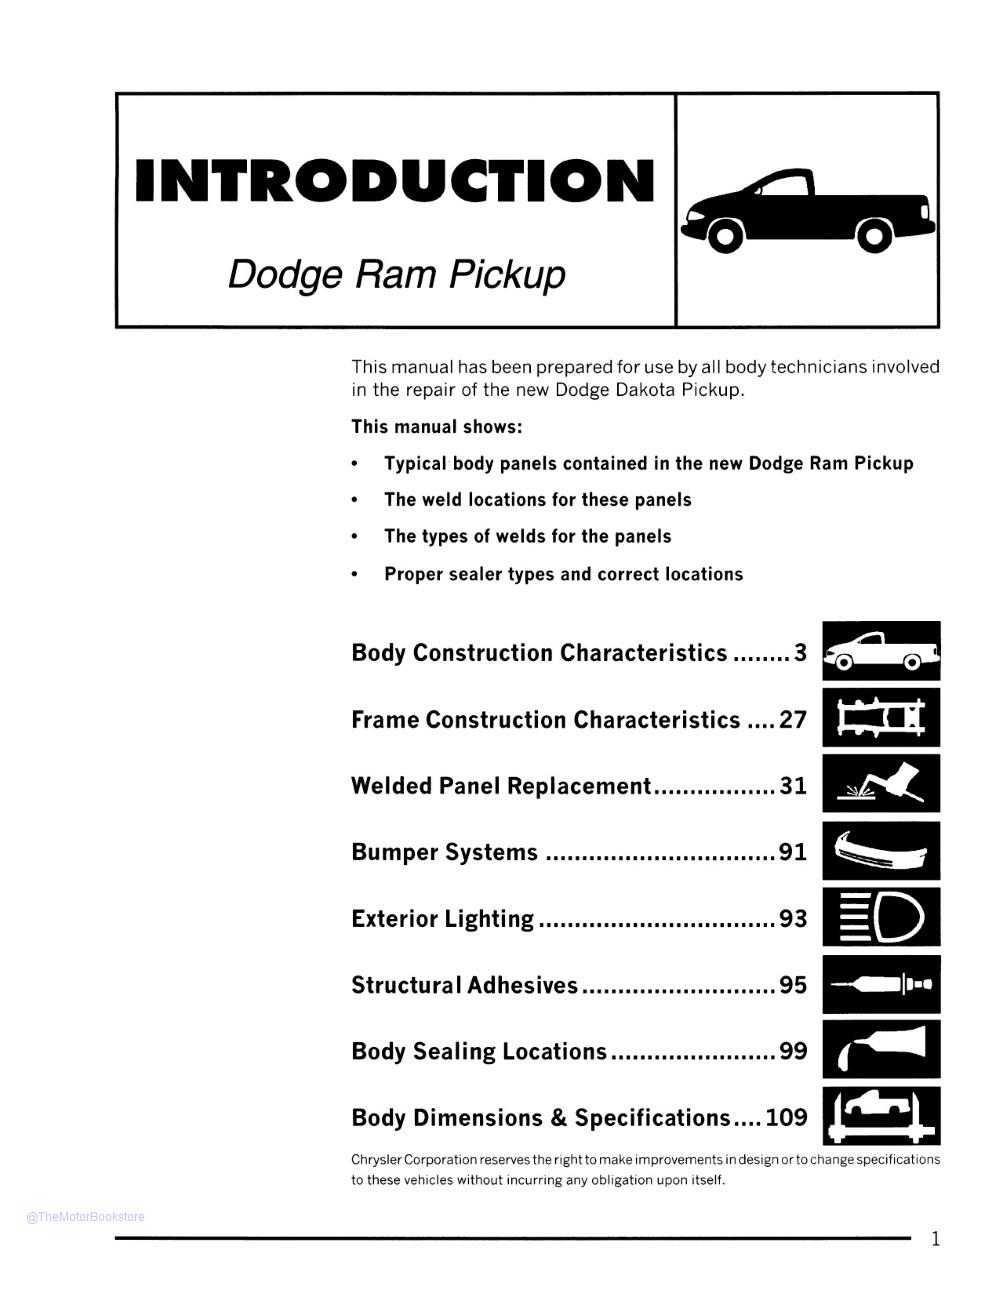 1998 Dodge Ram Truck 1500-3500 Dimensions, Joint, and Seams Manual Supplement  - Table of Contents